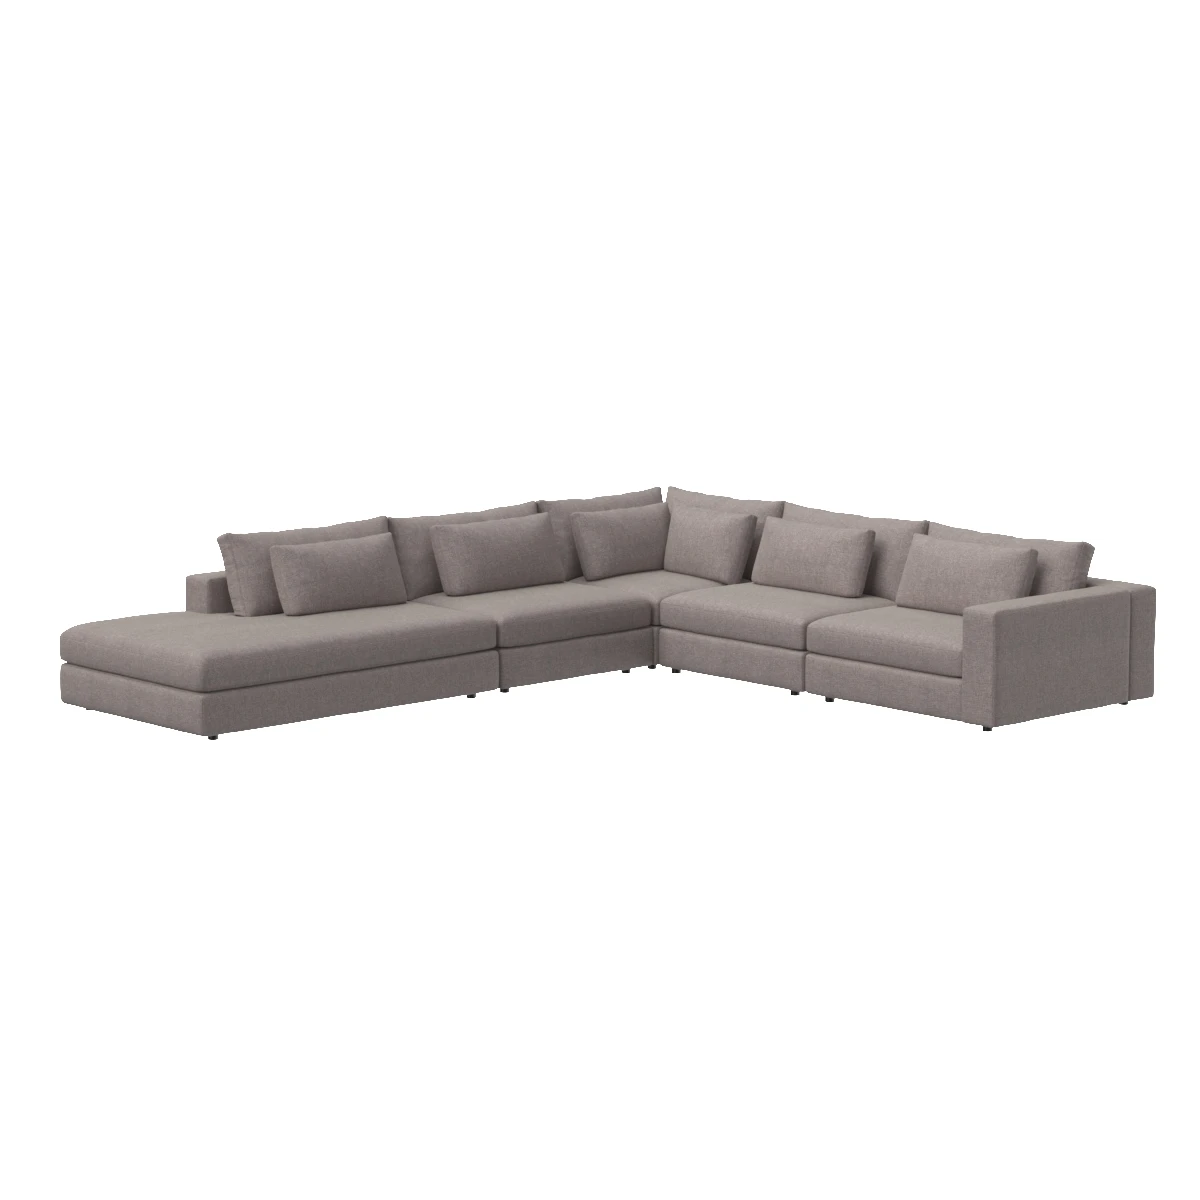 Atelier Bloor 4 Pc Raf Sectional W Ottoman Ches UATR-066-360-S3 3D Model_01